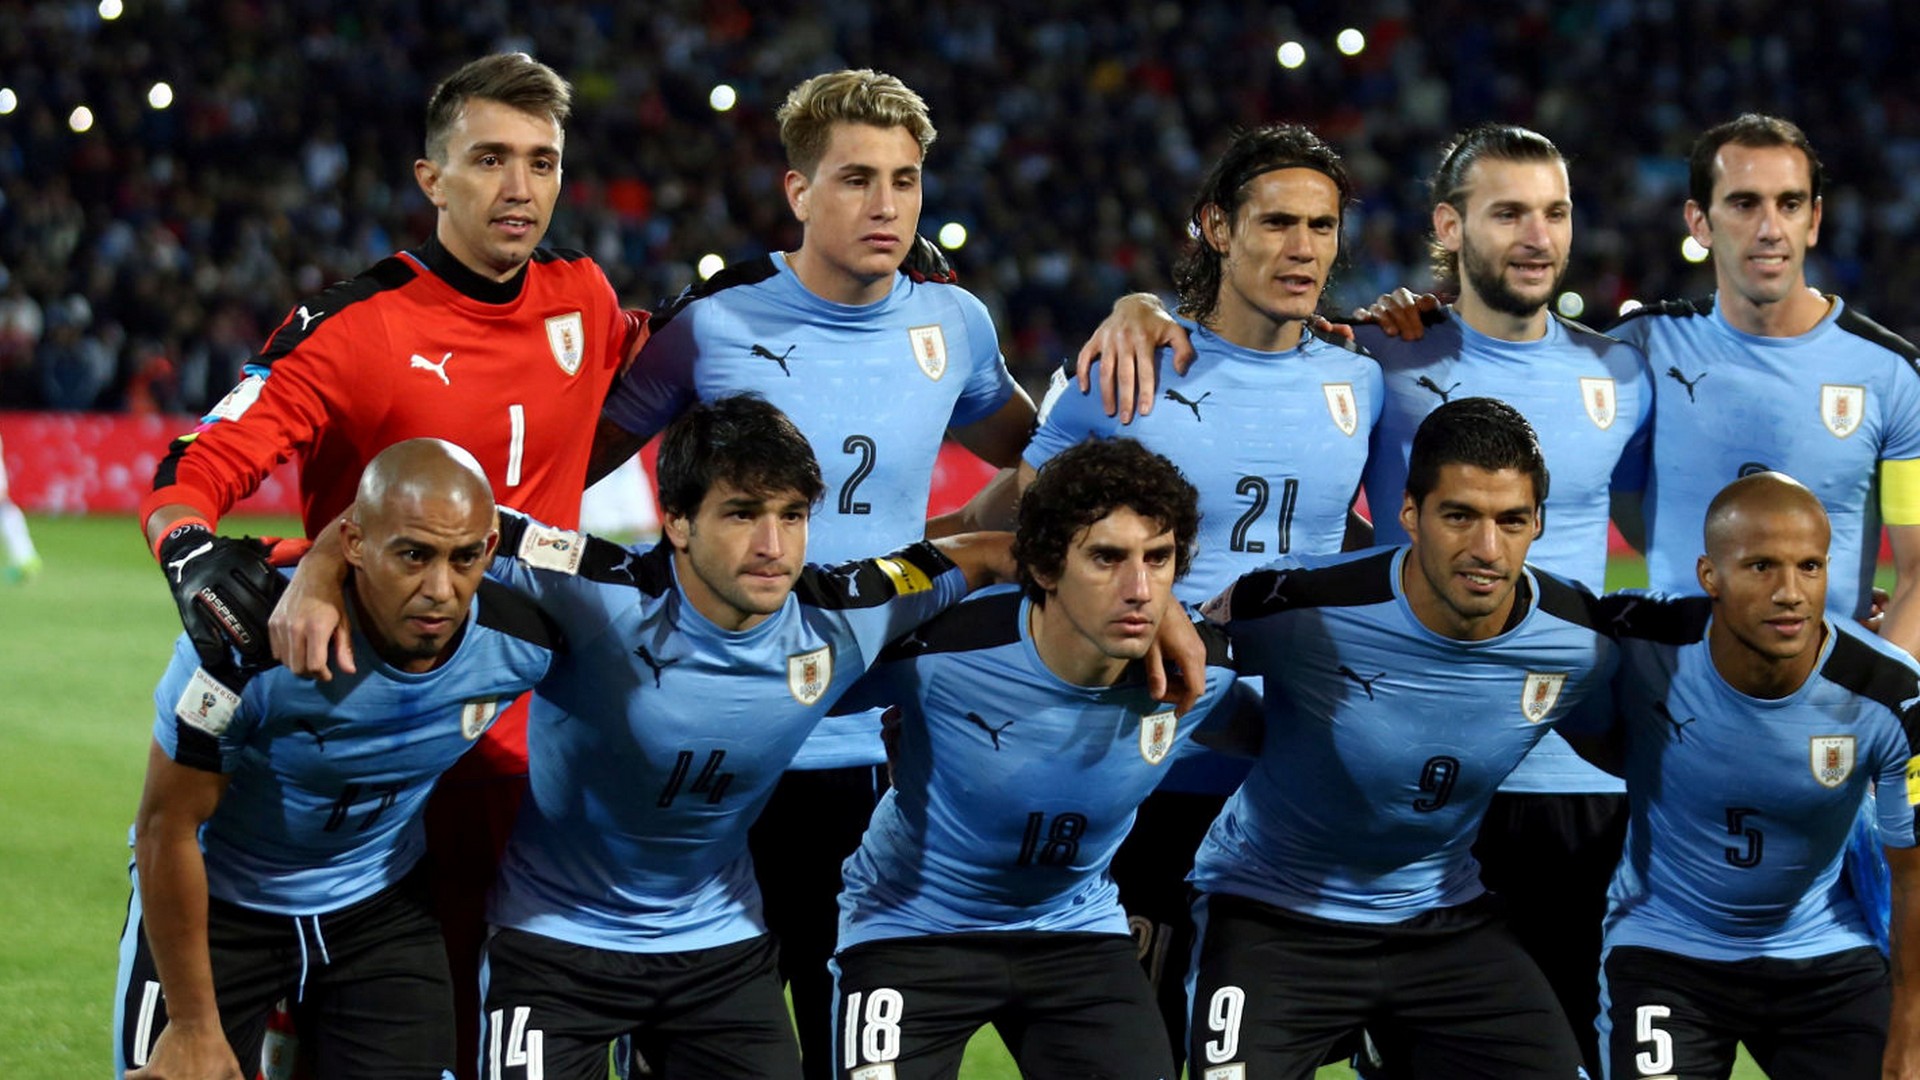 HD Wallpaper Uruguay National Team with image resolution 1920x1080 pixel. You can make this wallpaper for your Desktop Computer Backgrounds, Mac Wallpapers, Android Lock screen or iPhone Screensavers